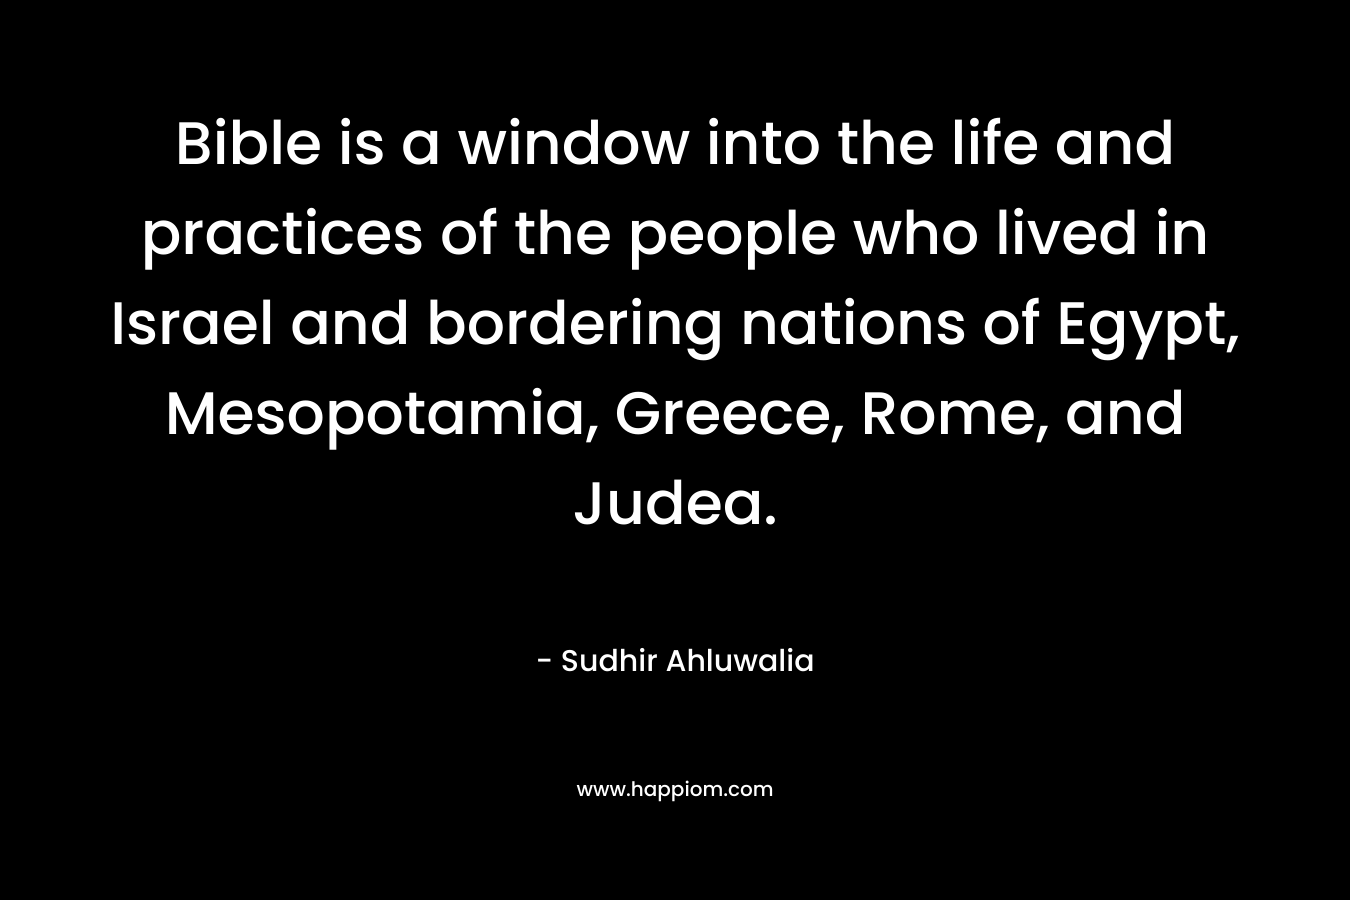 Bible is a window into the life and practices of the people who lived in Israel and bordering nations of Egypt, Mesopotamia, Greece, Rome, and Judea. – Sudhir Ahluwalia